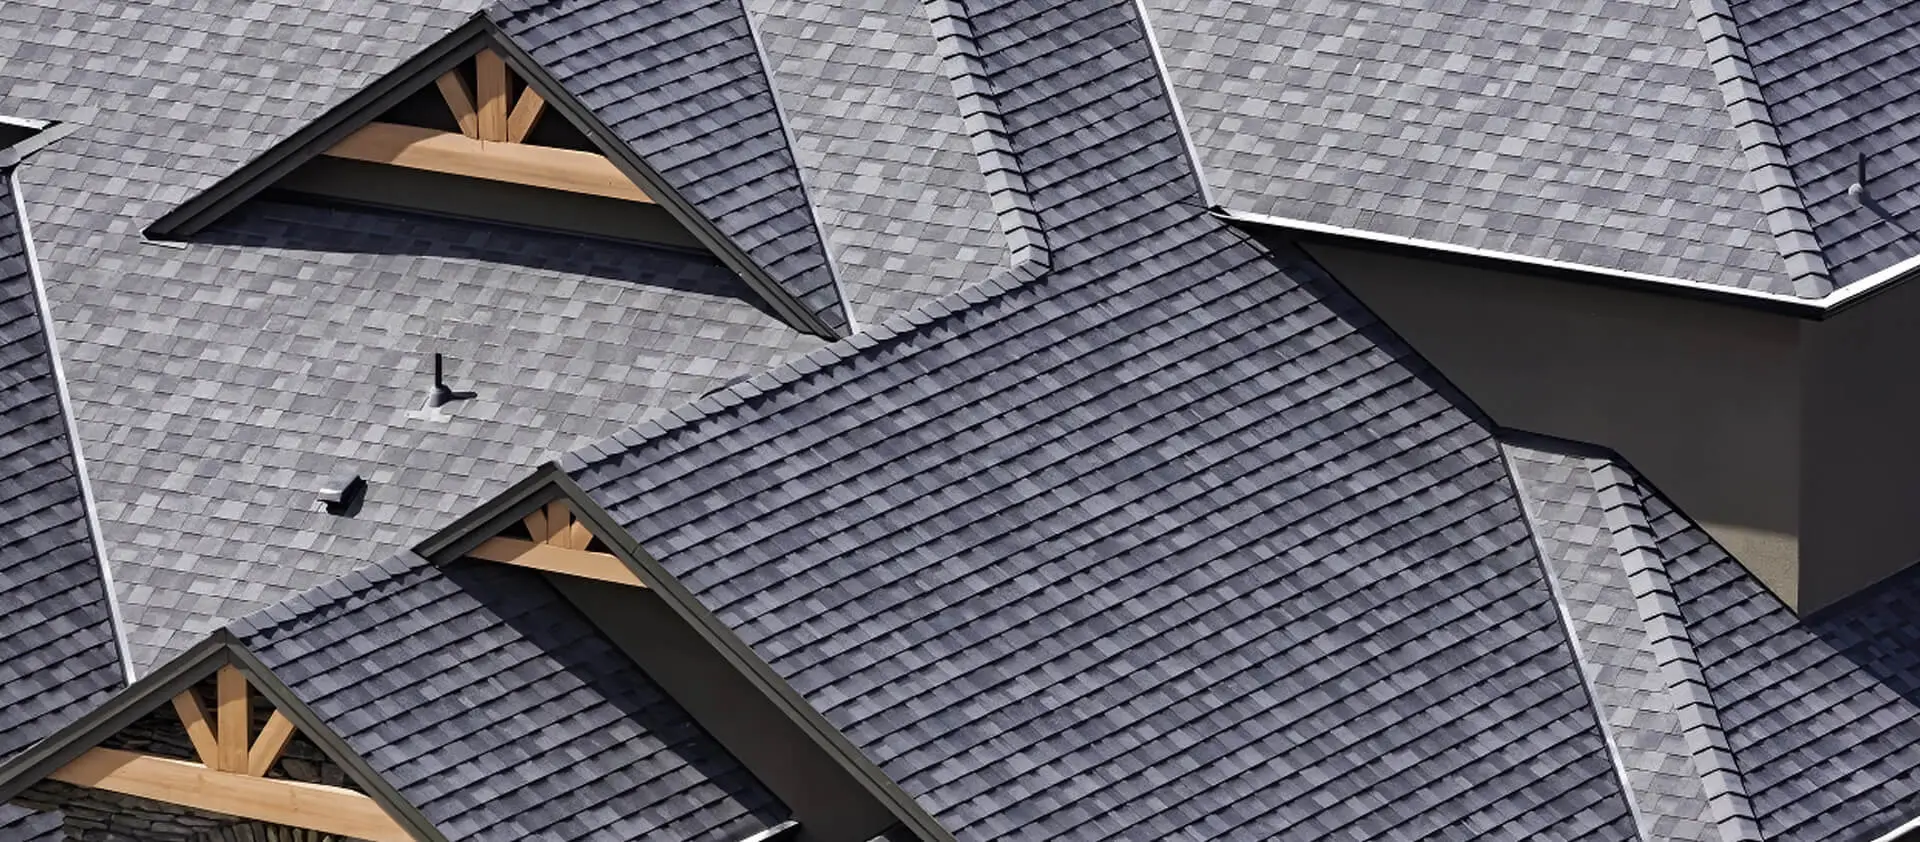 Rooftop in a Newly Constructed Subdivision Showing Asphalt Shingles and Multiple Roof Lines